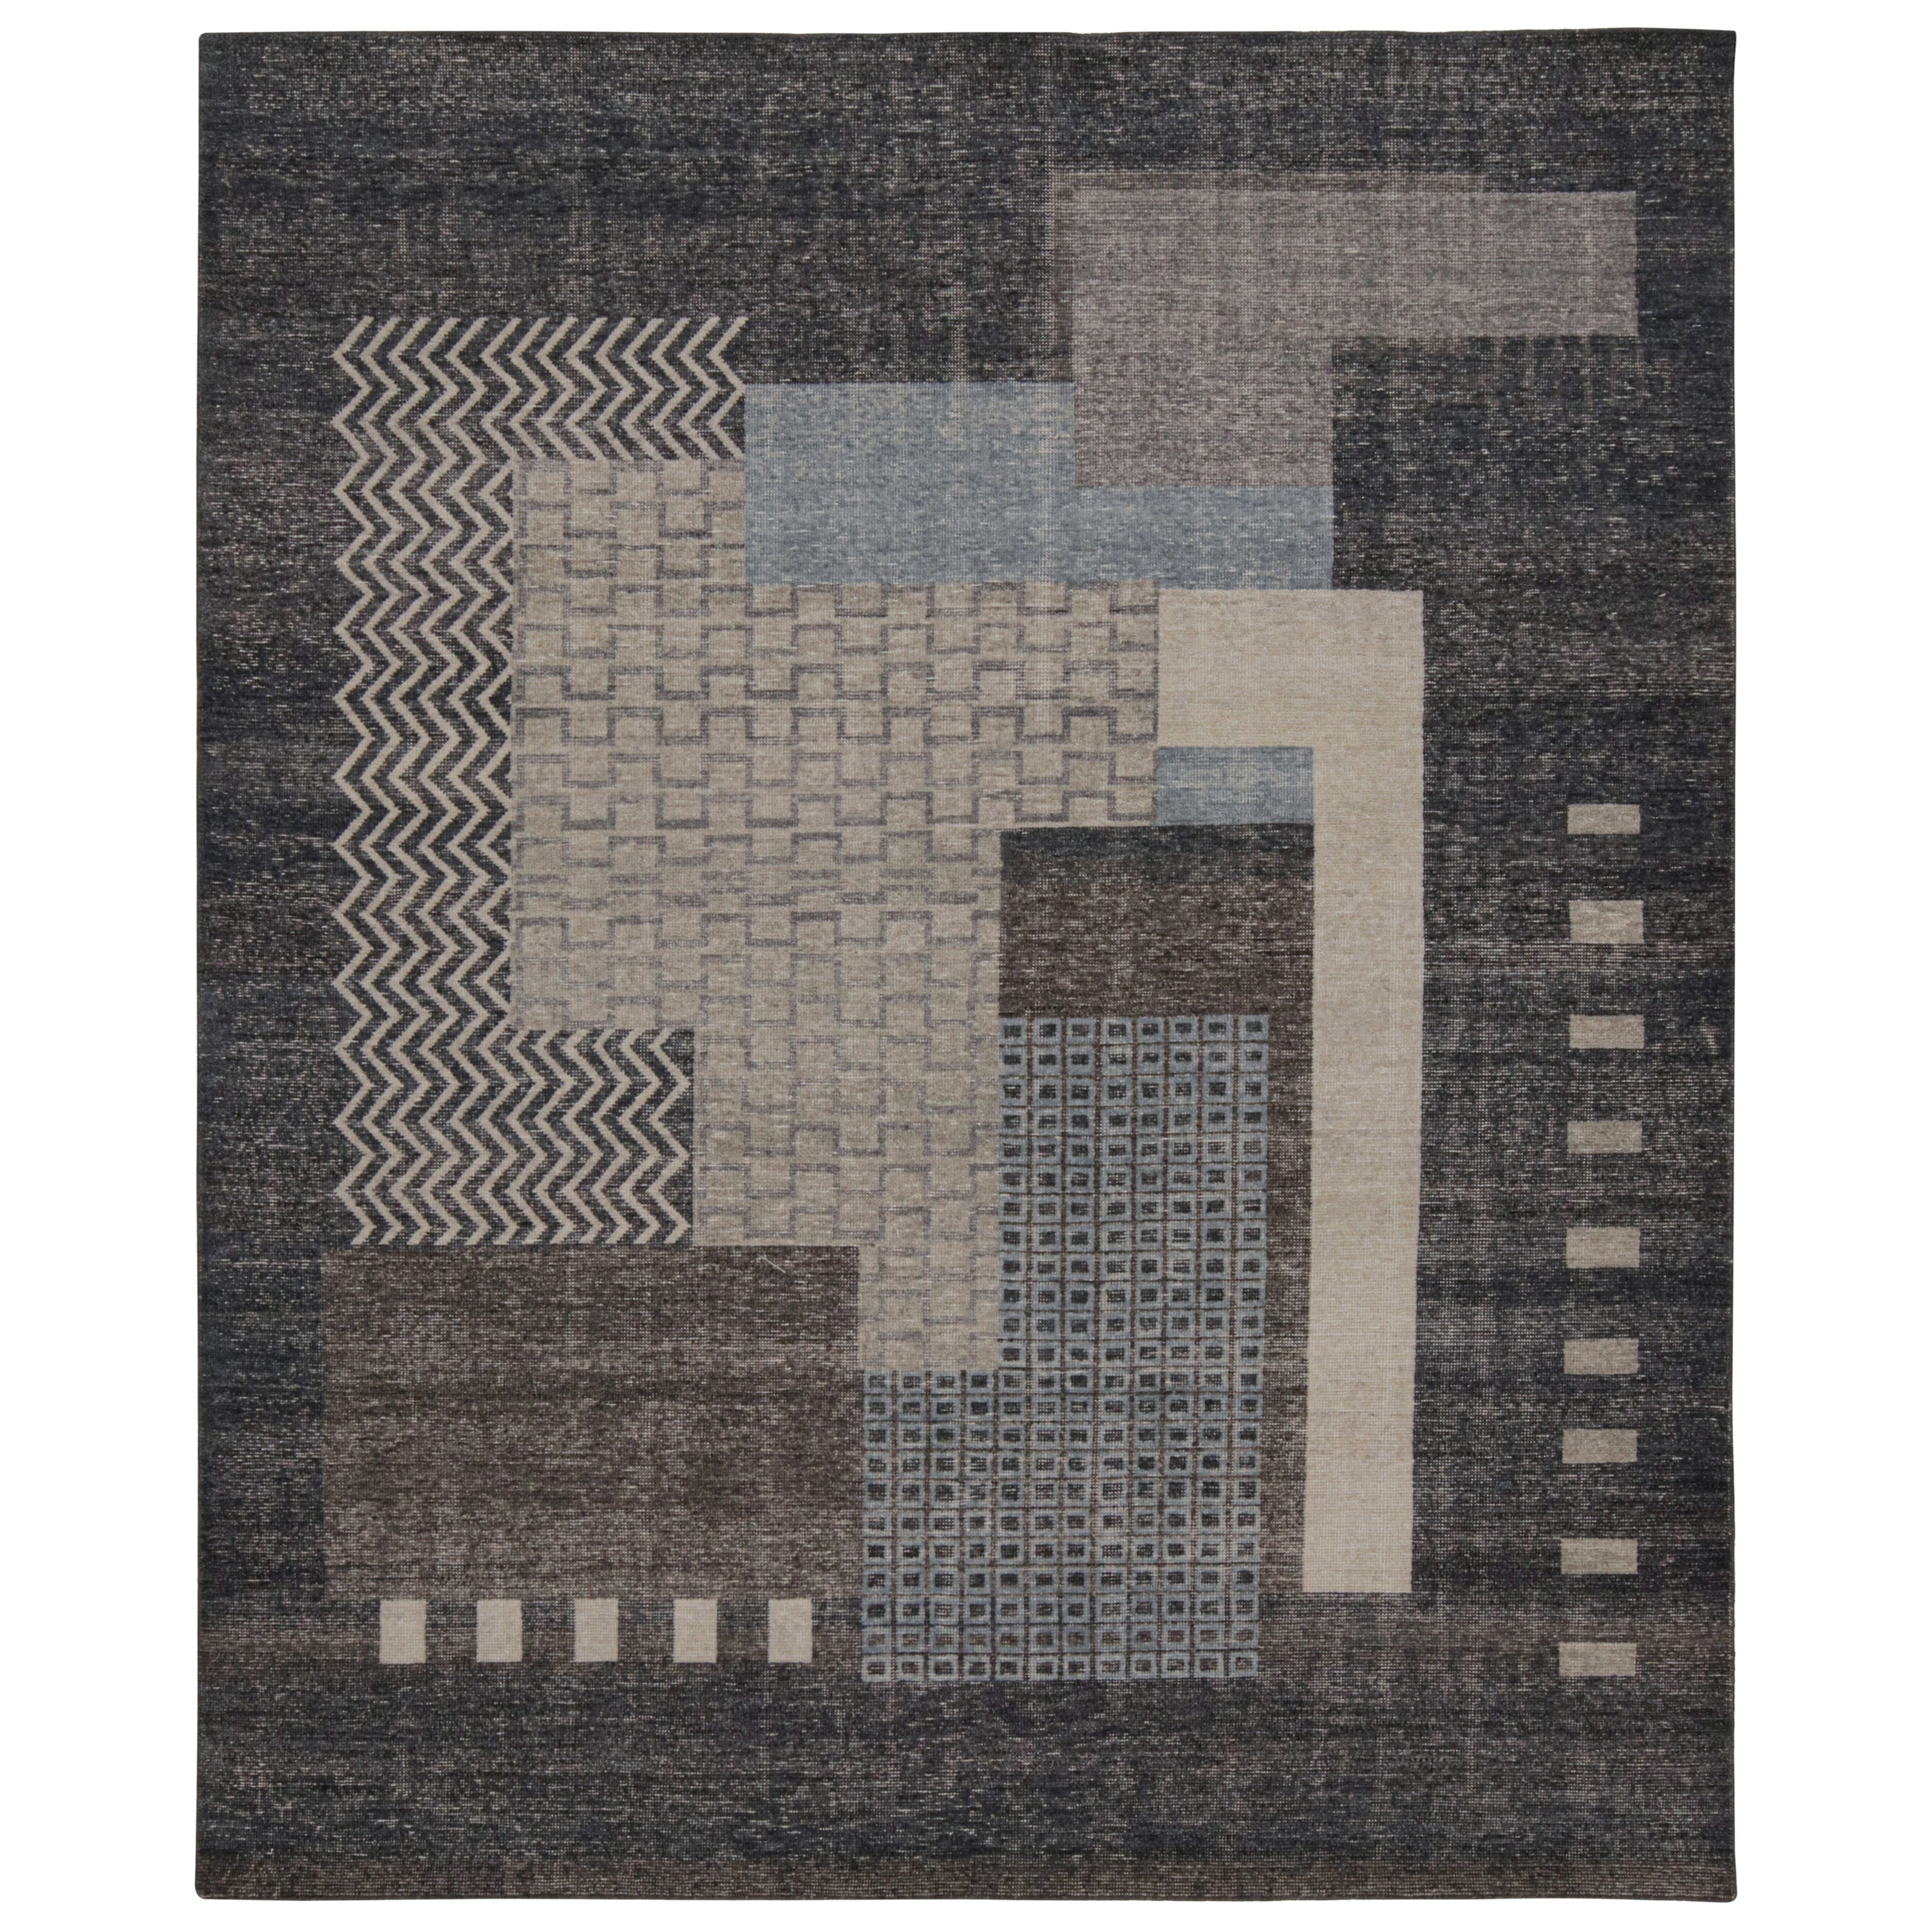 Rug & Kilim's Modern French Art Deco Rug, with Geometric Patterns (en anglais seulement)